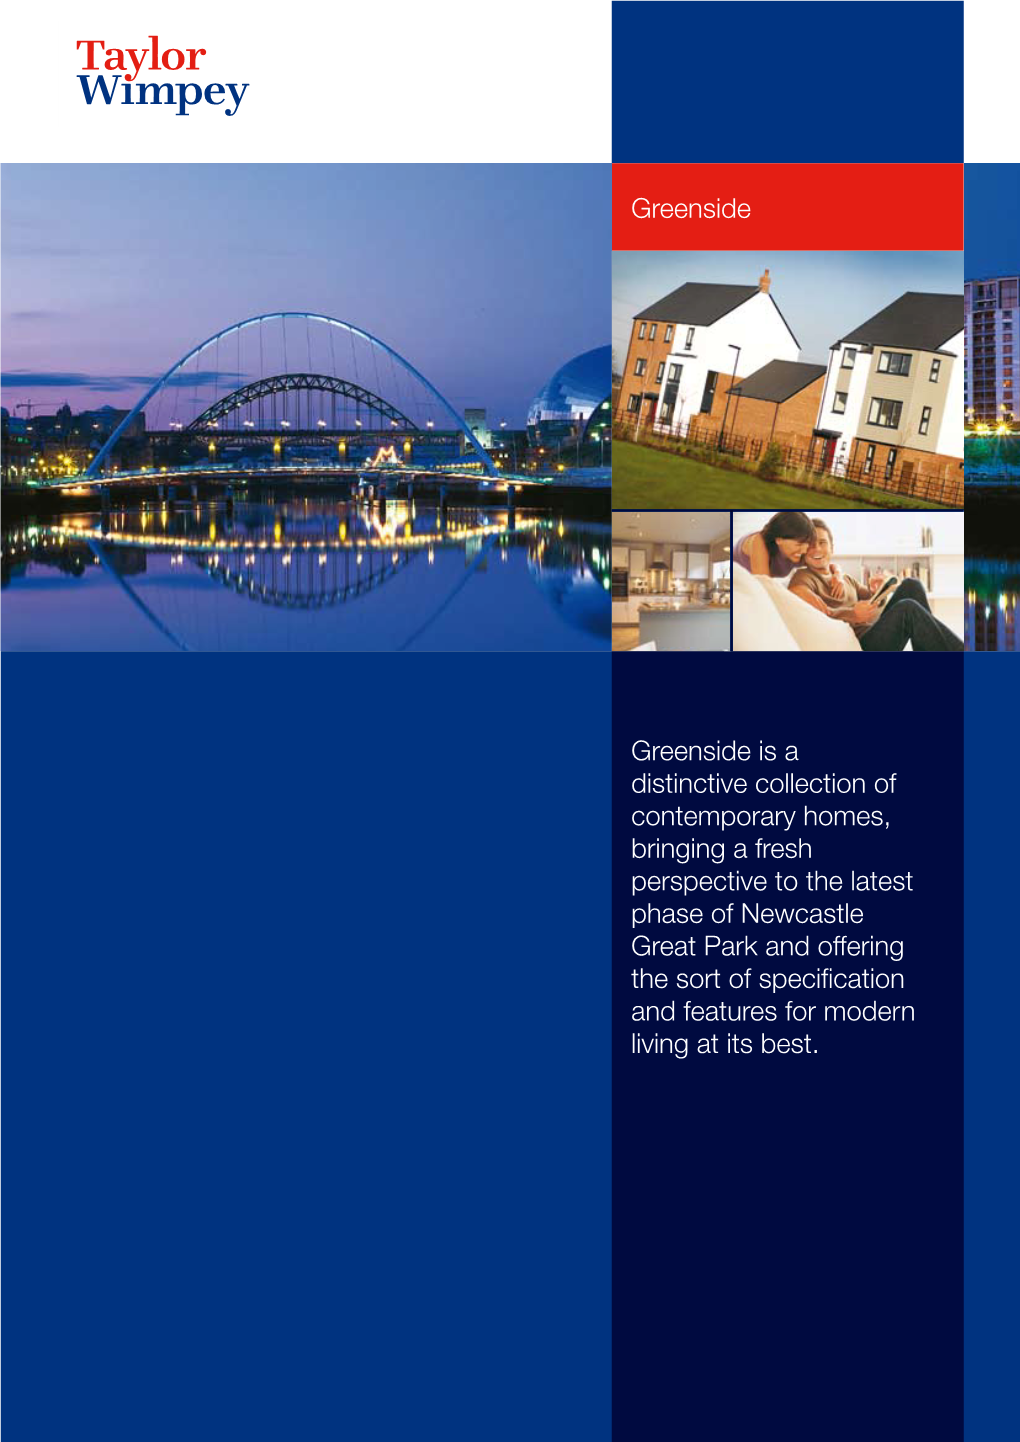 Taylor Wimpey North East